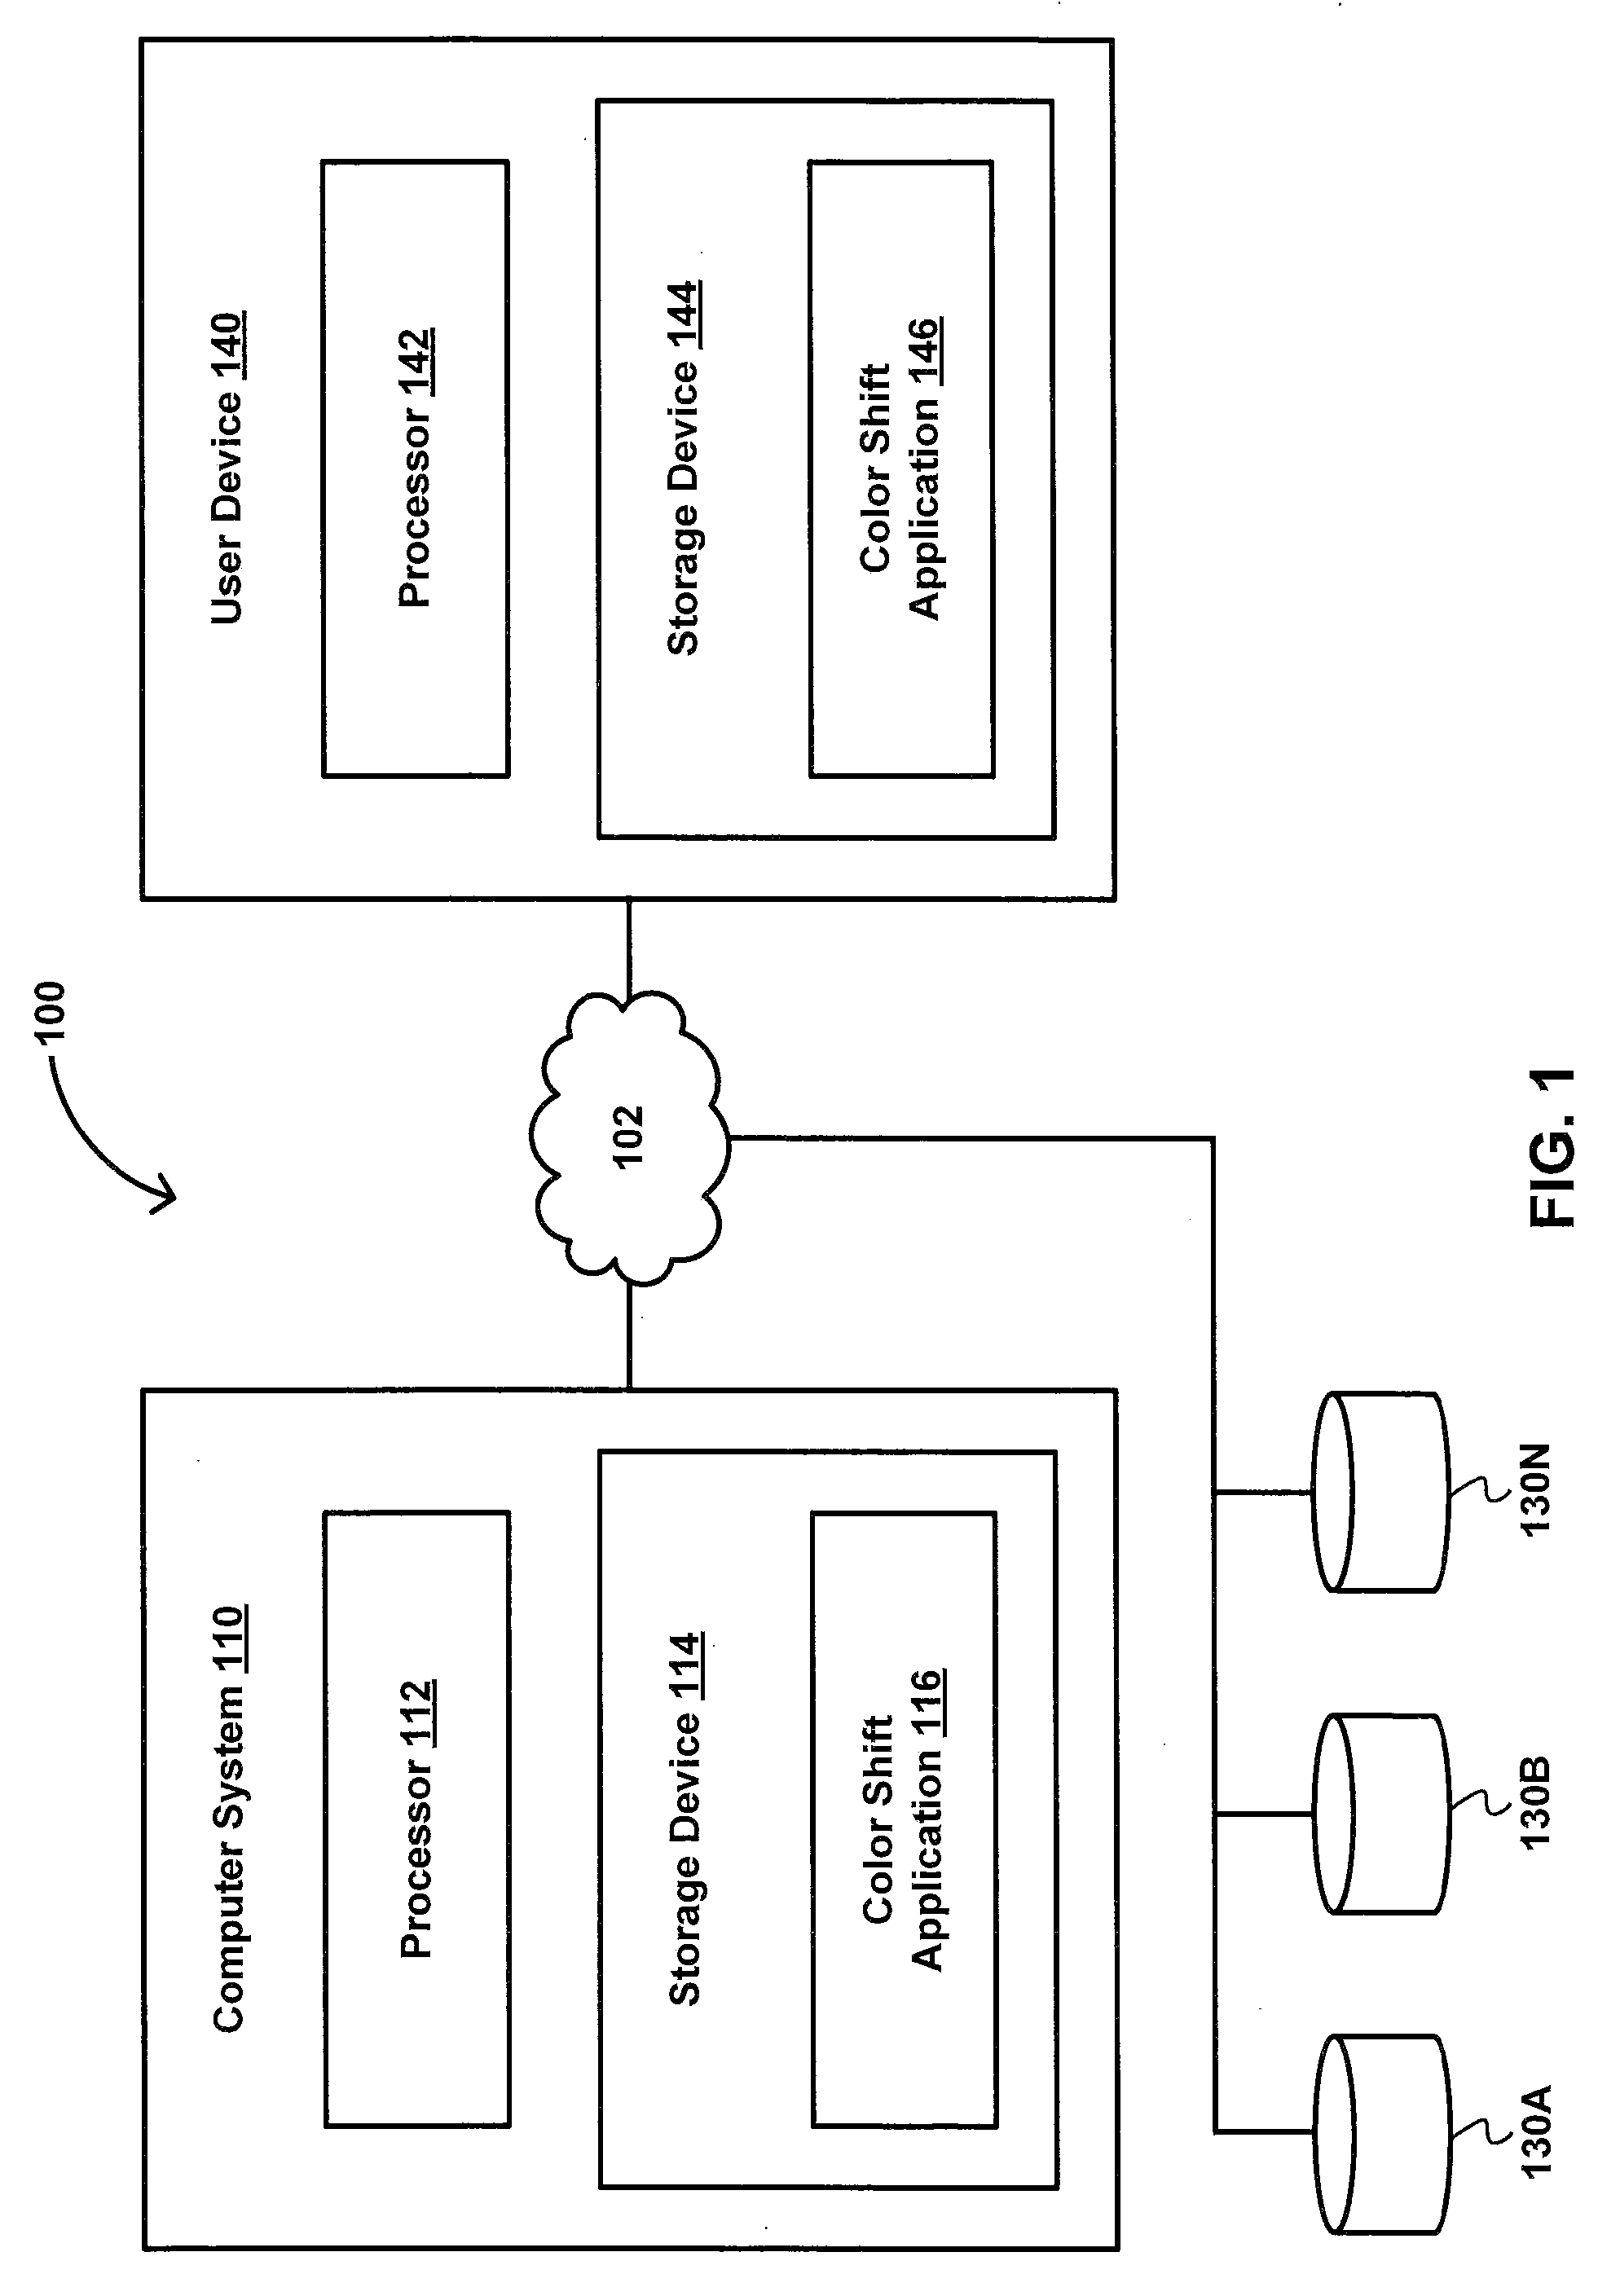 System and method of adjusting the color of image objects based on chained reference points, gradient characterization, and pre-stored indicators of environmental lighting conditions